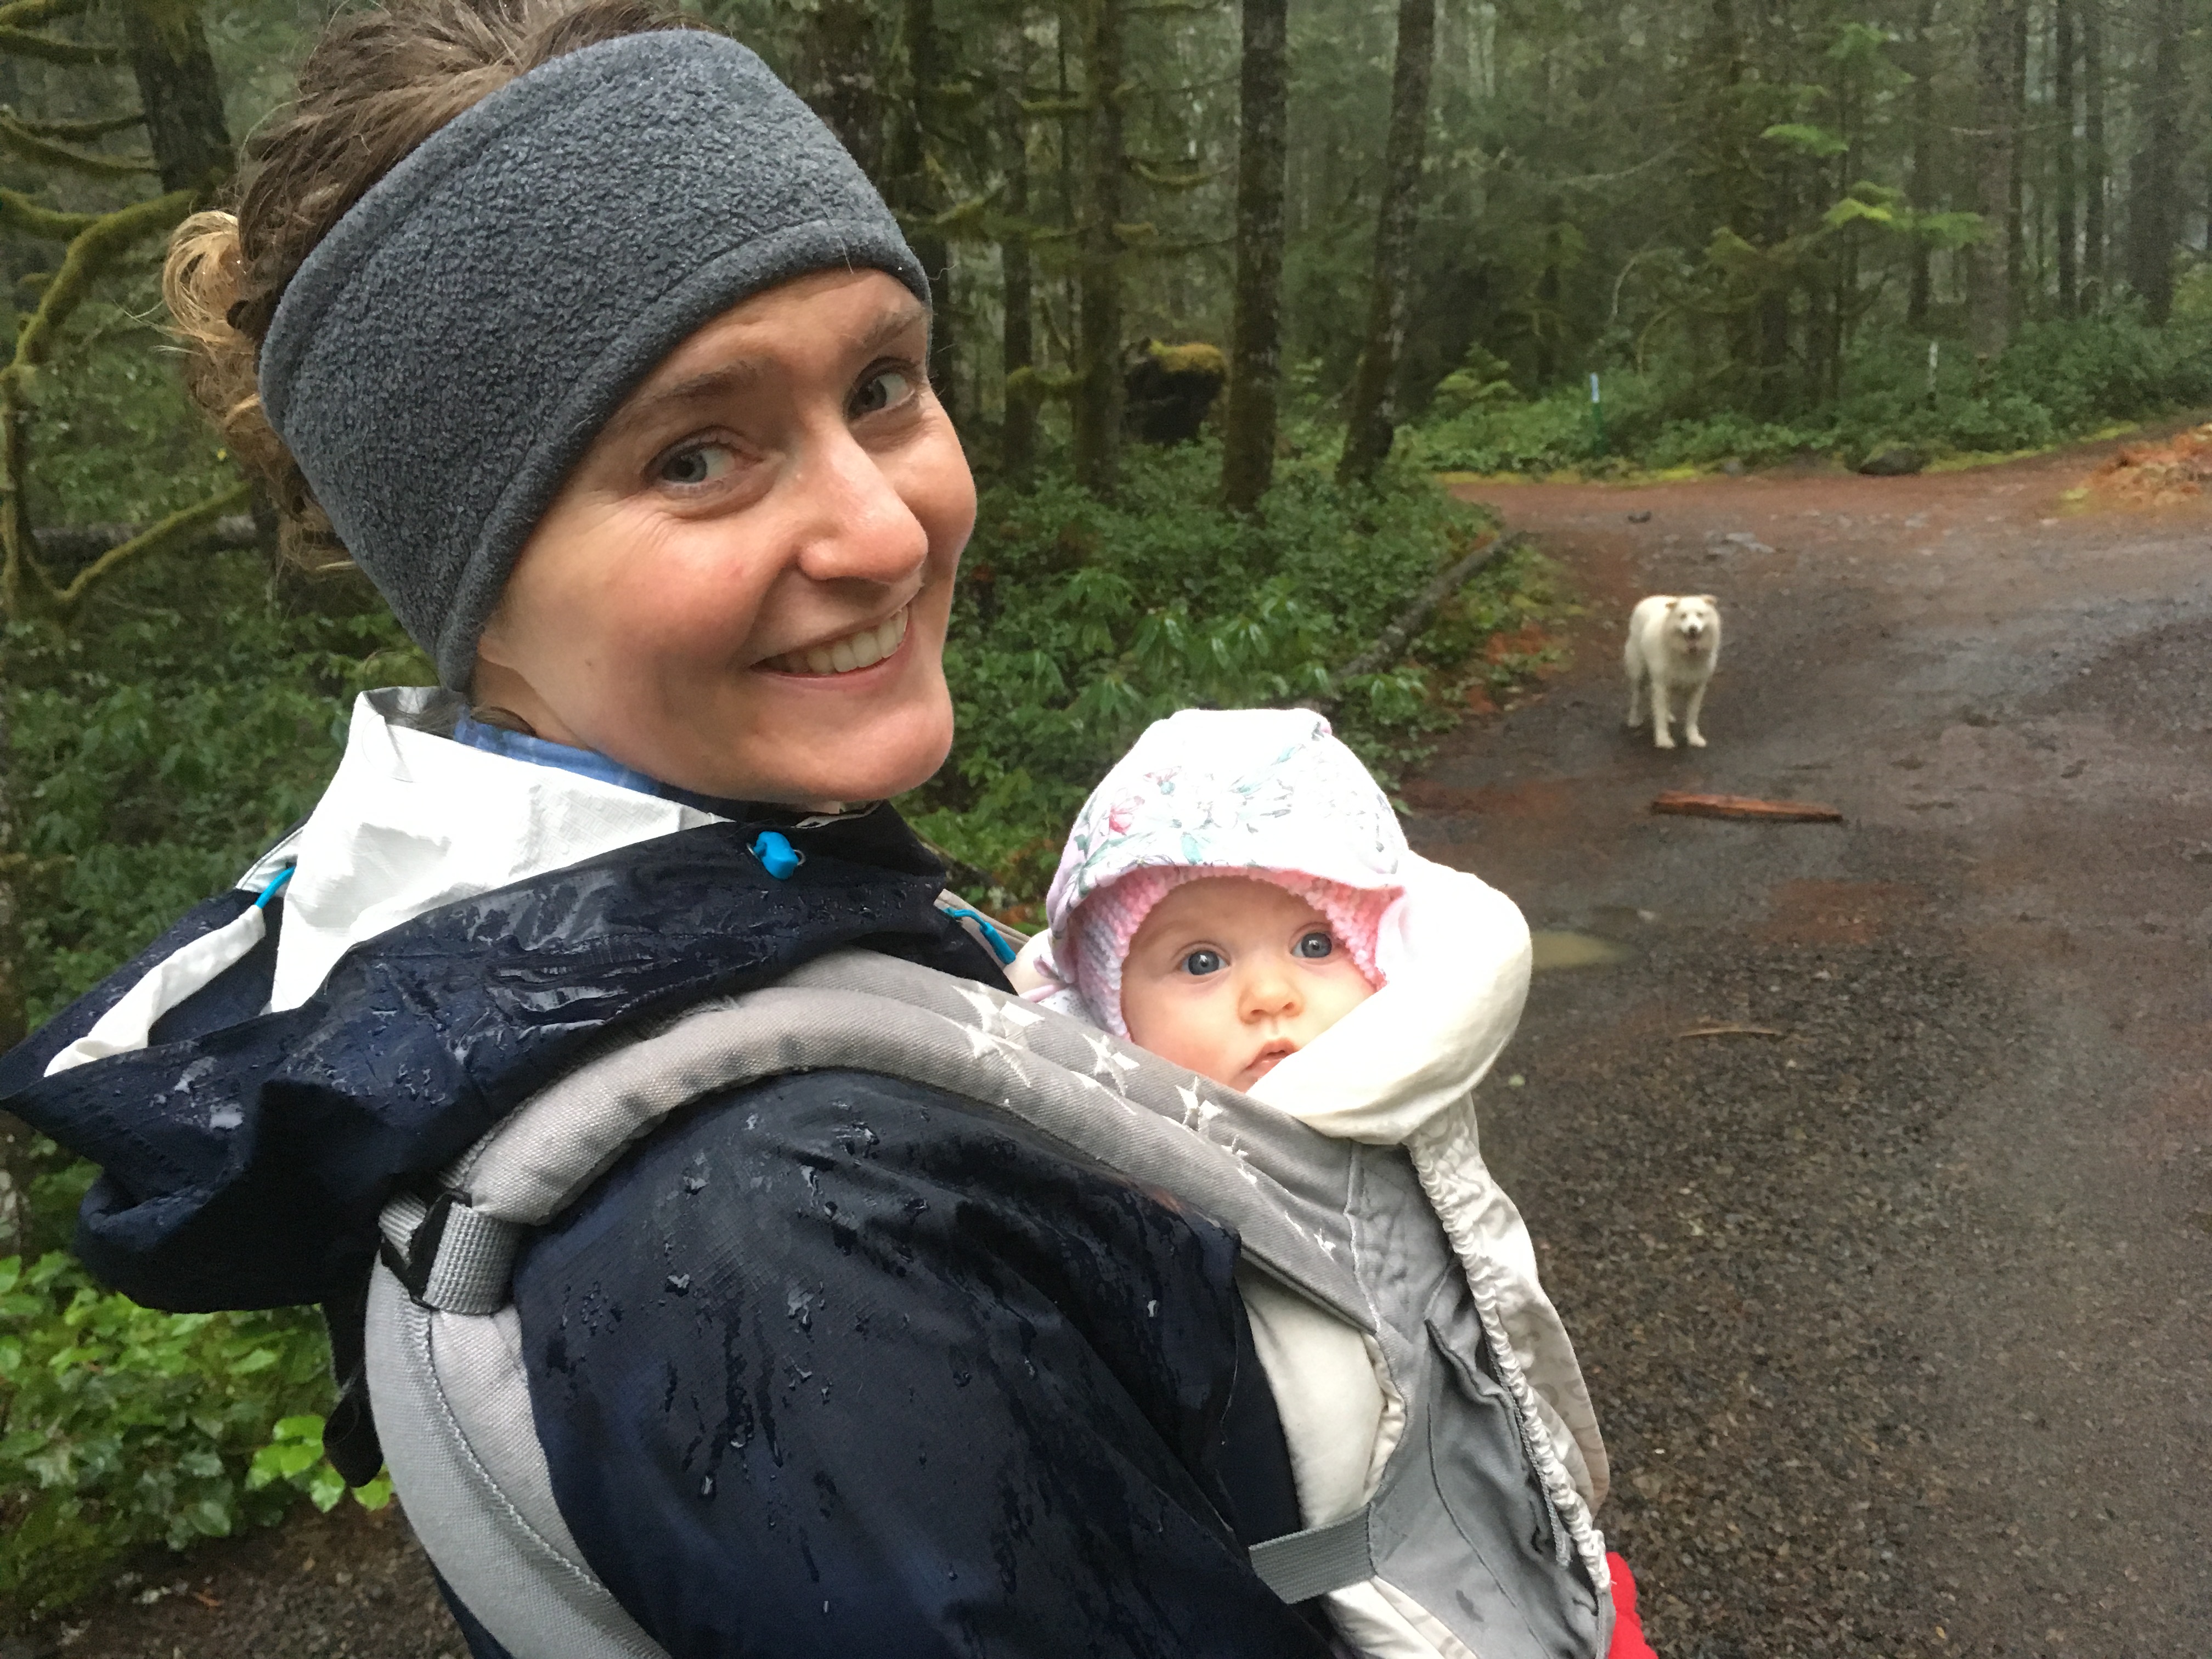 A woman holds a baby and smiles at the camera as they walk through the woods; a white dog stands on a dirt trail in the background.